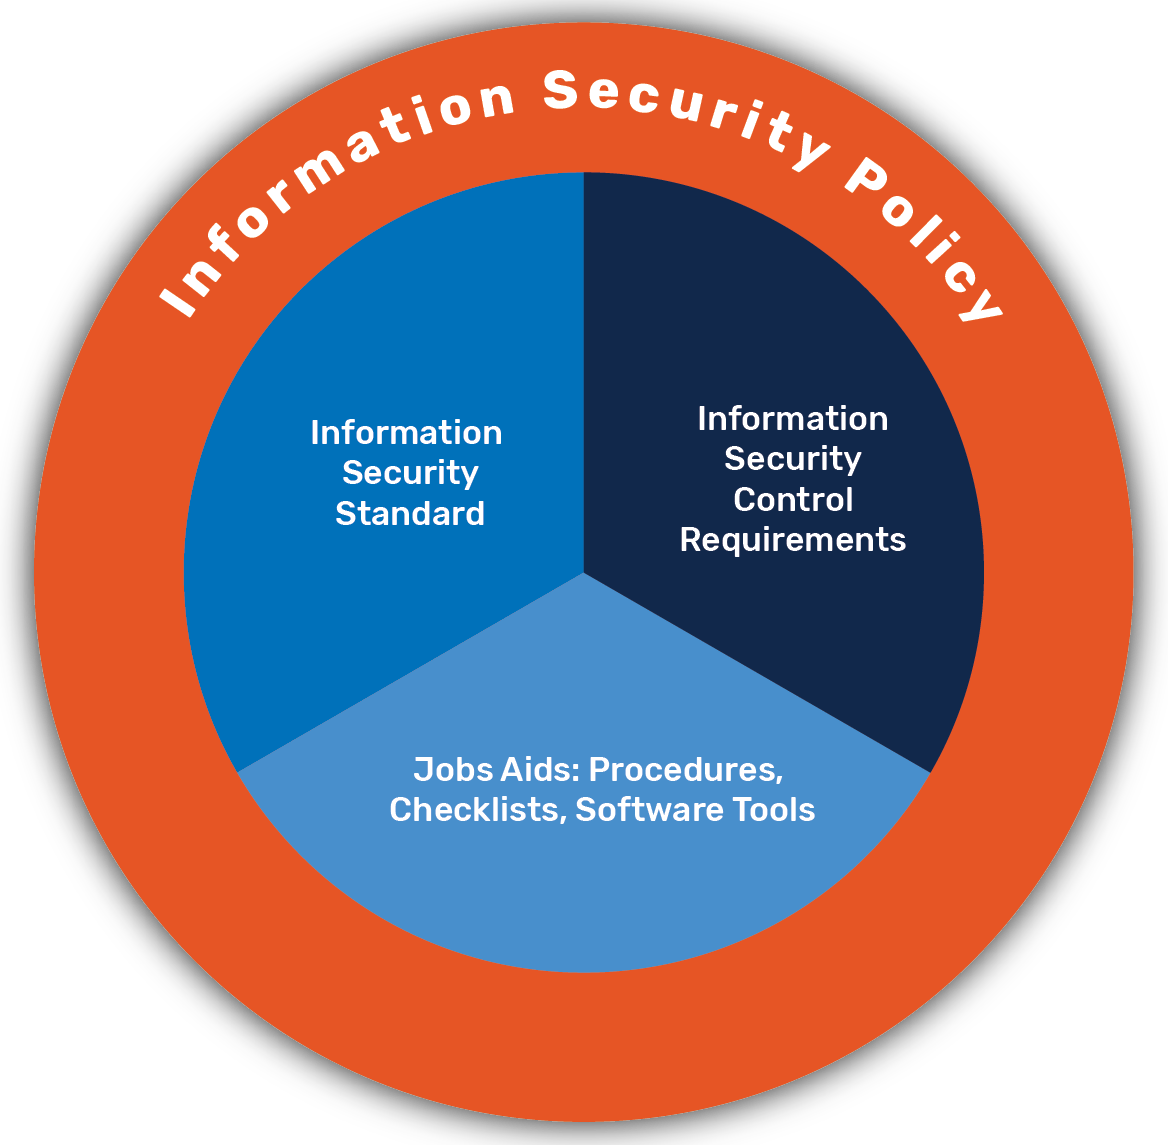 Security Program logo featuring the Data Policy and Information Security Policy circling the Information Security standards, control requirements, and job aids.